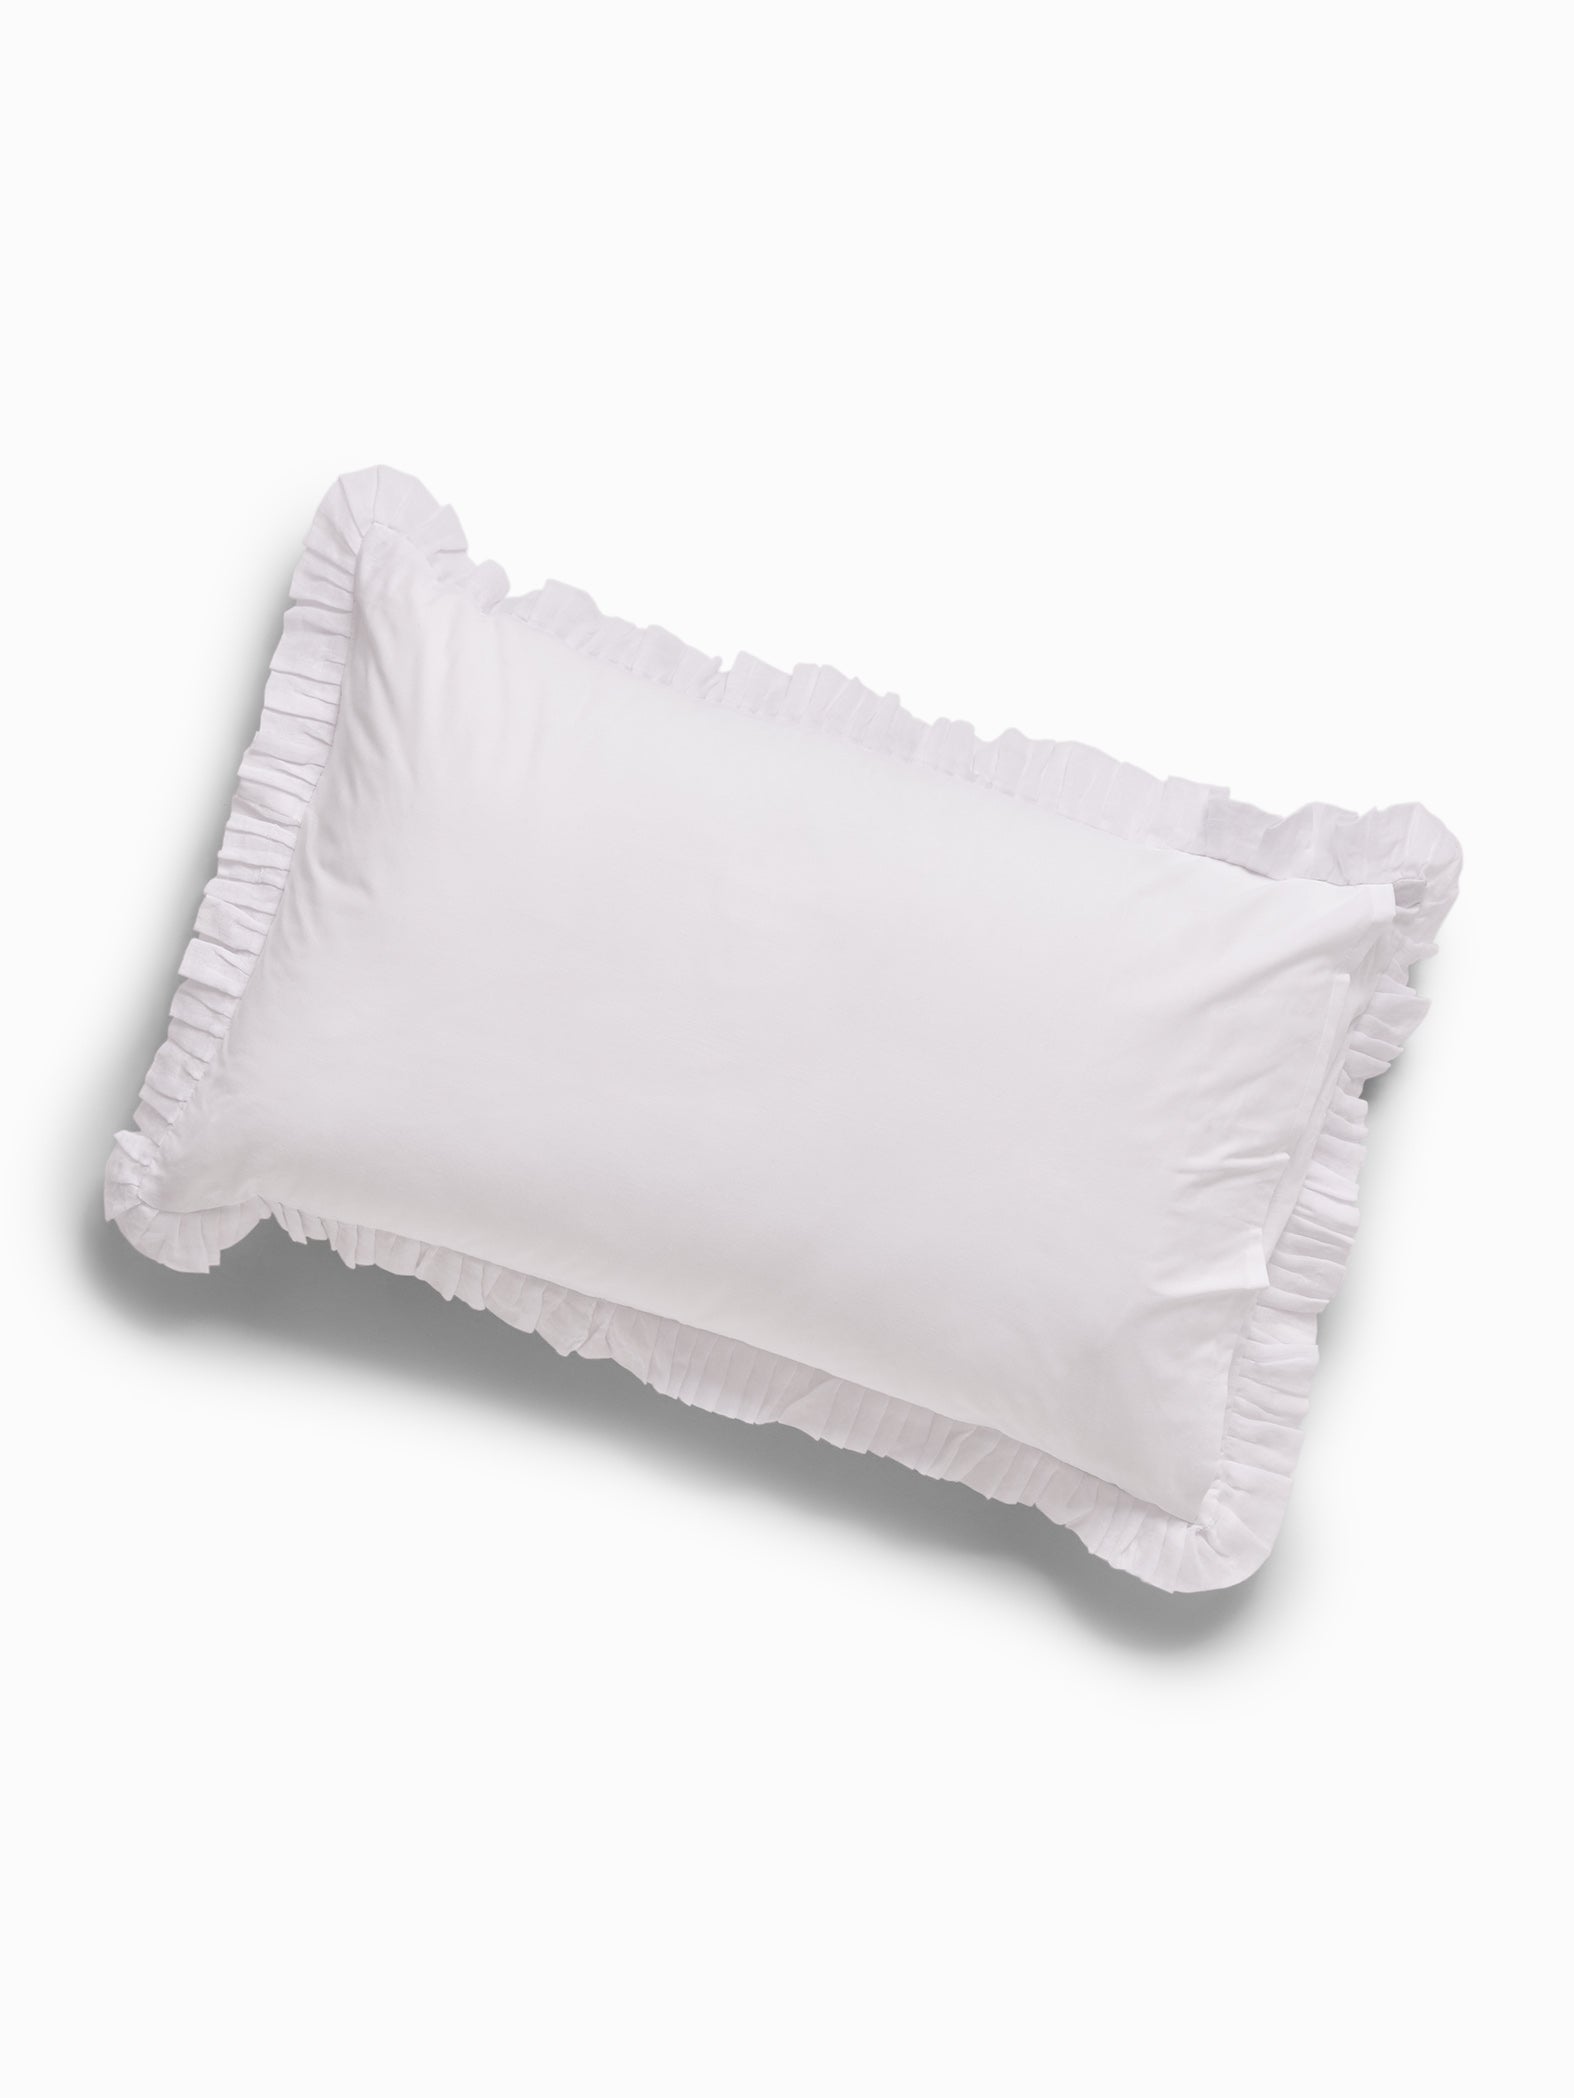 Lilac & White Pillow Cover Set